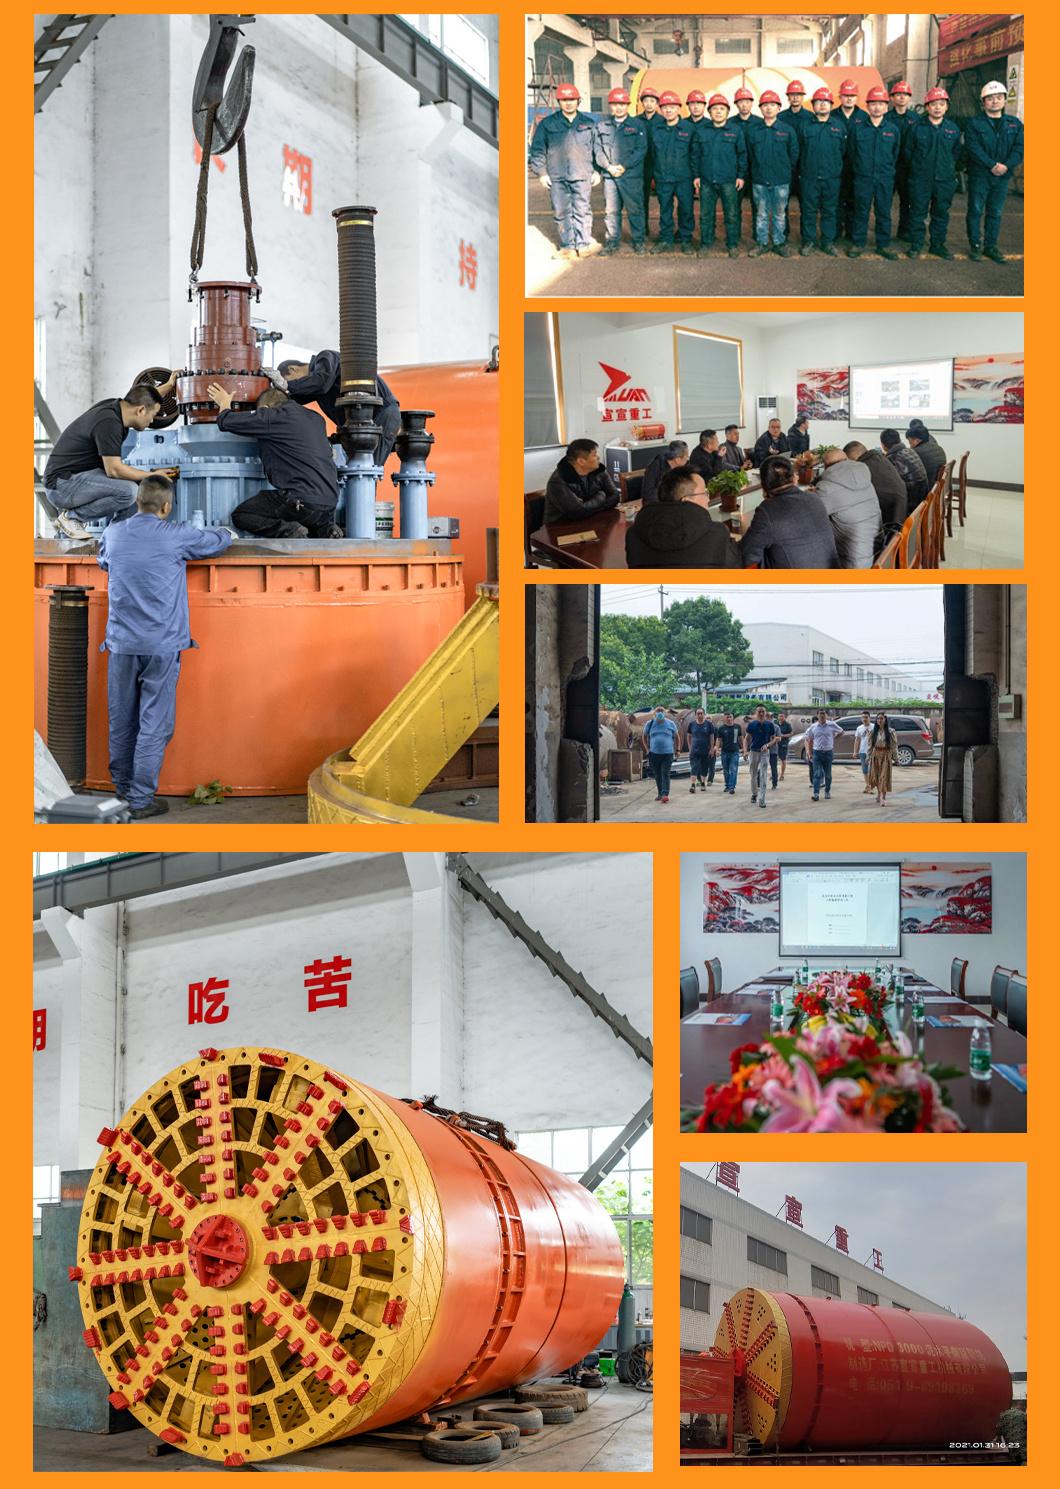 Xuan Xuan Hot Sale Trenchless Project Ysd3000 Rock Pipe Jacking Machine for Rcc for Sale with Good Price